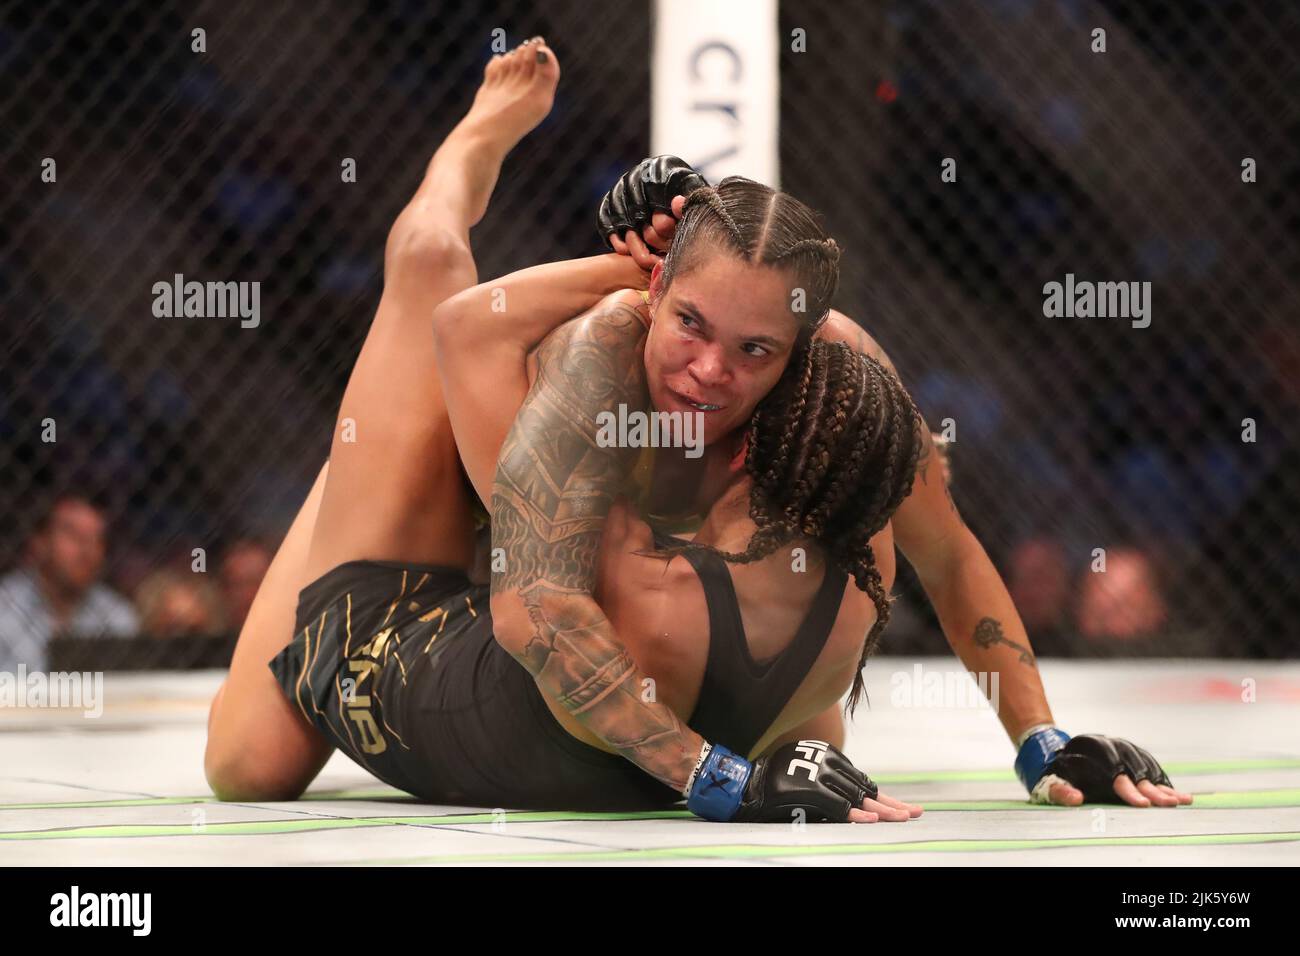 DALLAS, TX - JULY 30: Amanda Nunes (top) controls the body of Julianna Peña in their Women Bantamweight bout during the UFC 277 event at American Airlines Center on July 30, 2022, in Dallas, Texas, United States. (Photo by Alejandro Salazar/PxImages) Credit: Px Images/Alamy Live News Stock Photo